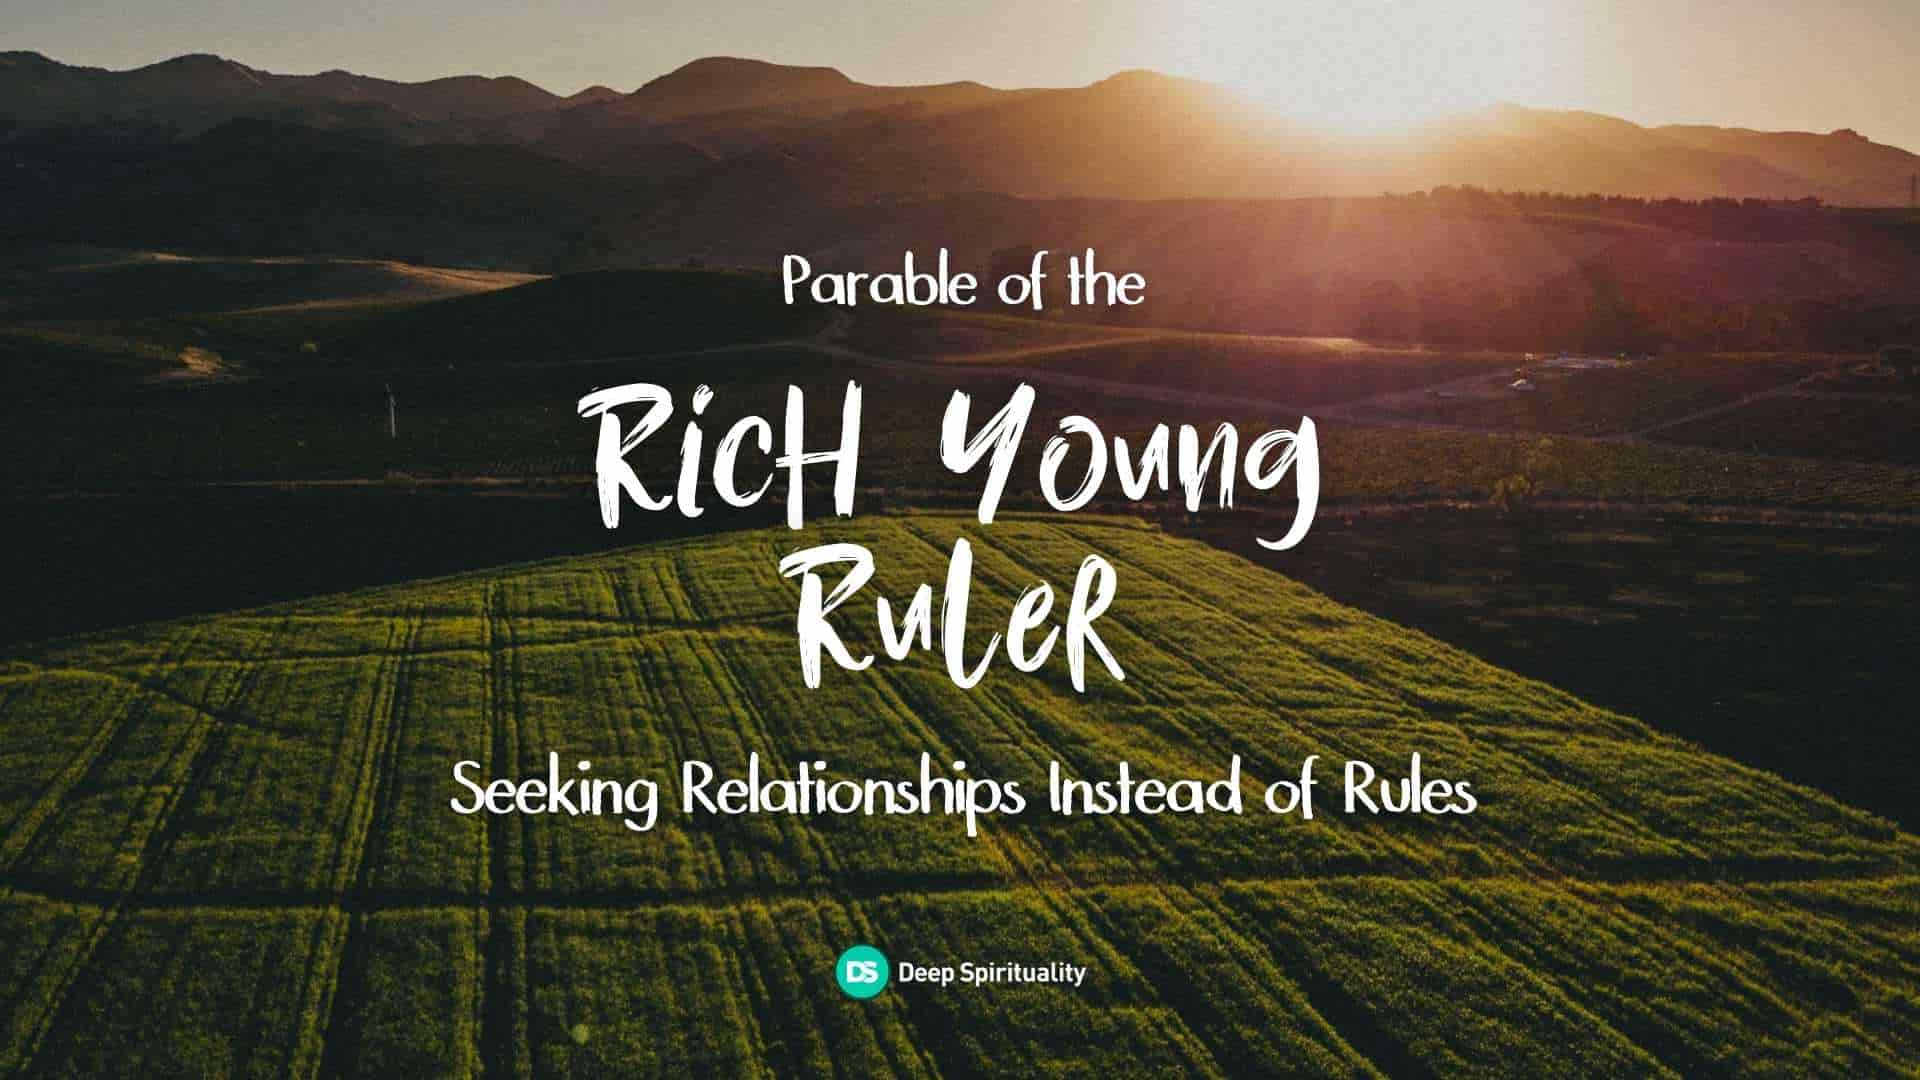 The Rich Young Ruler: How to Stop Seeing Rules and Start Seeing Relationship 67